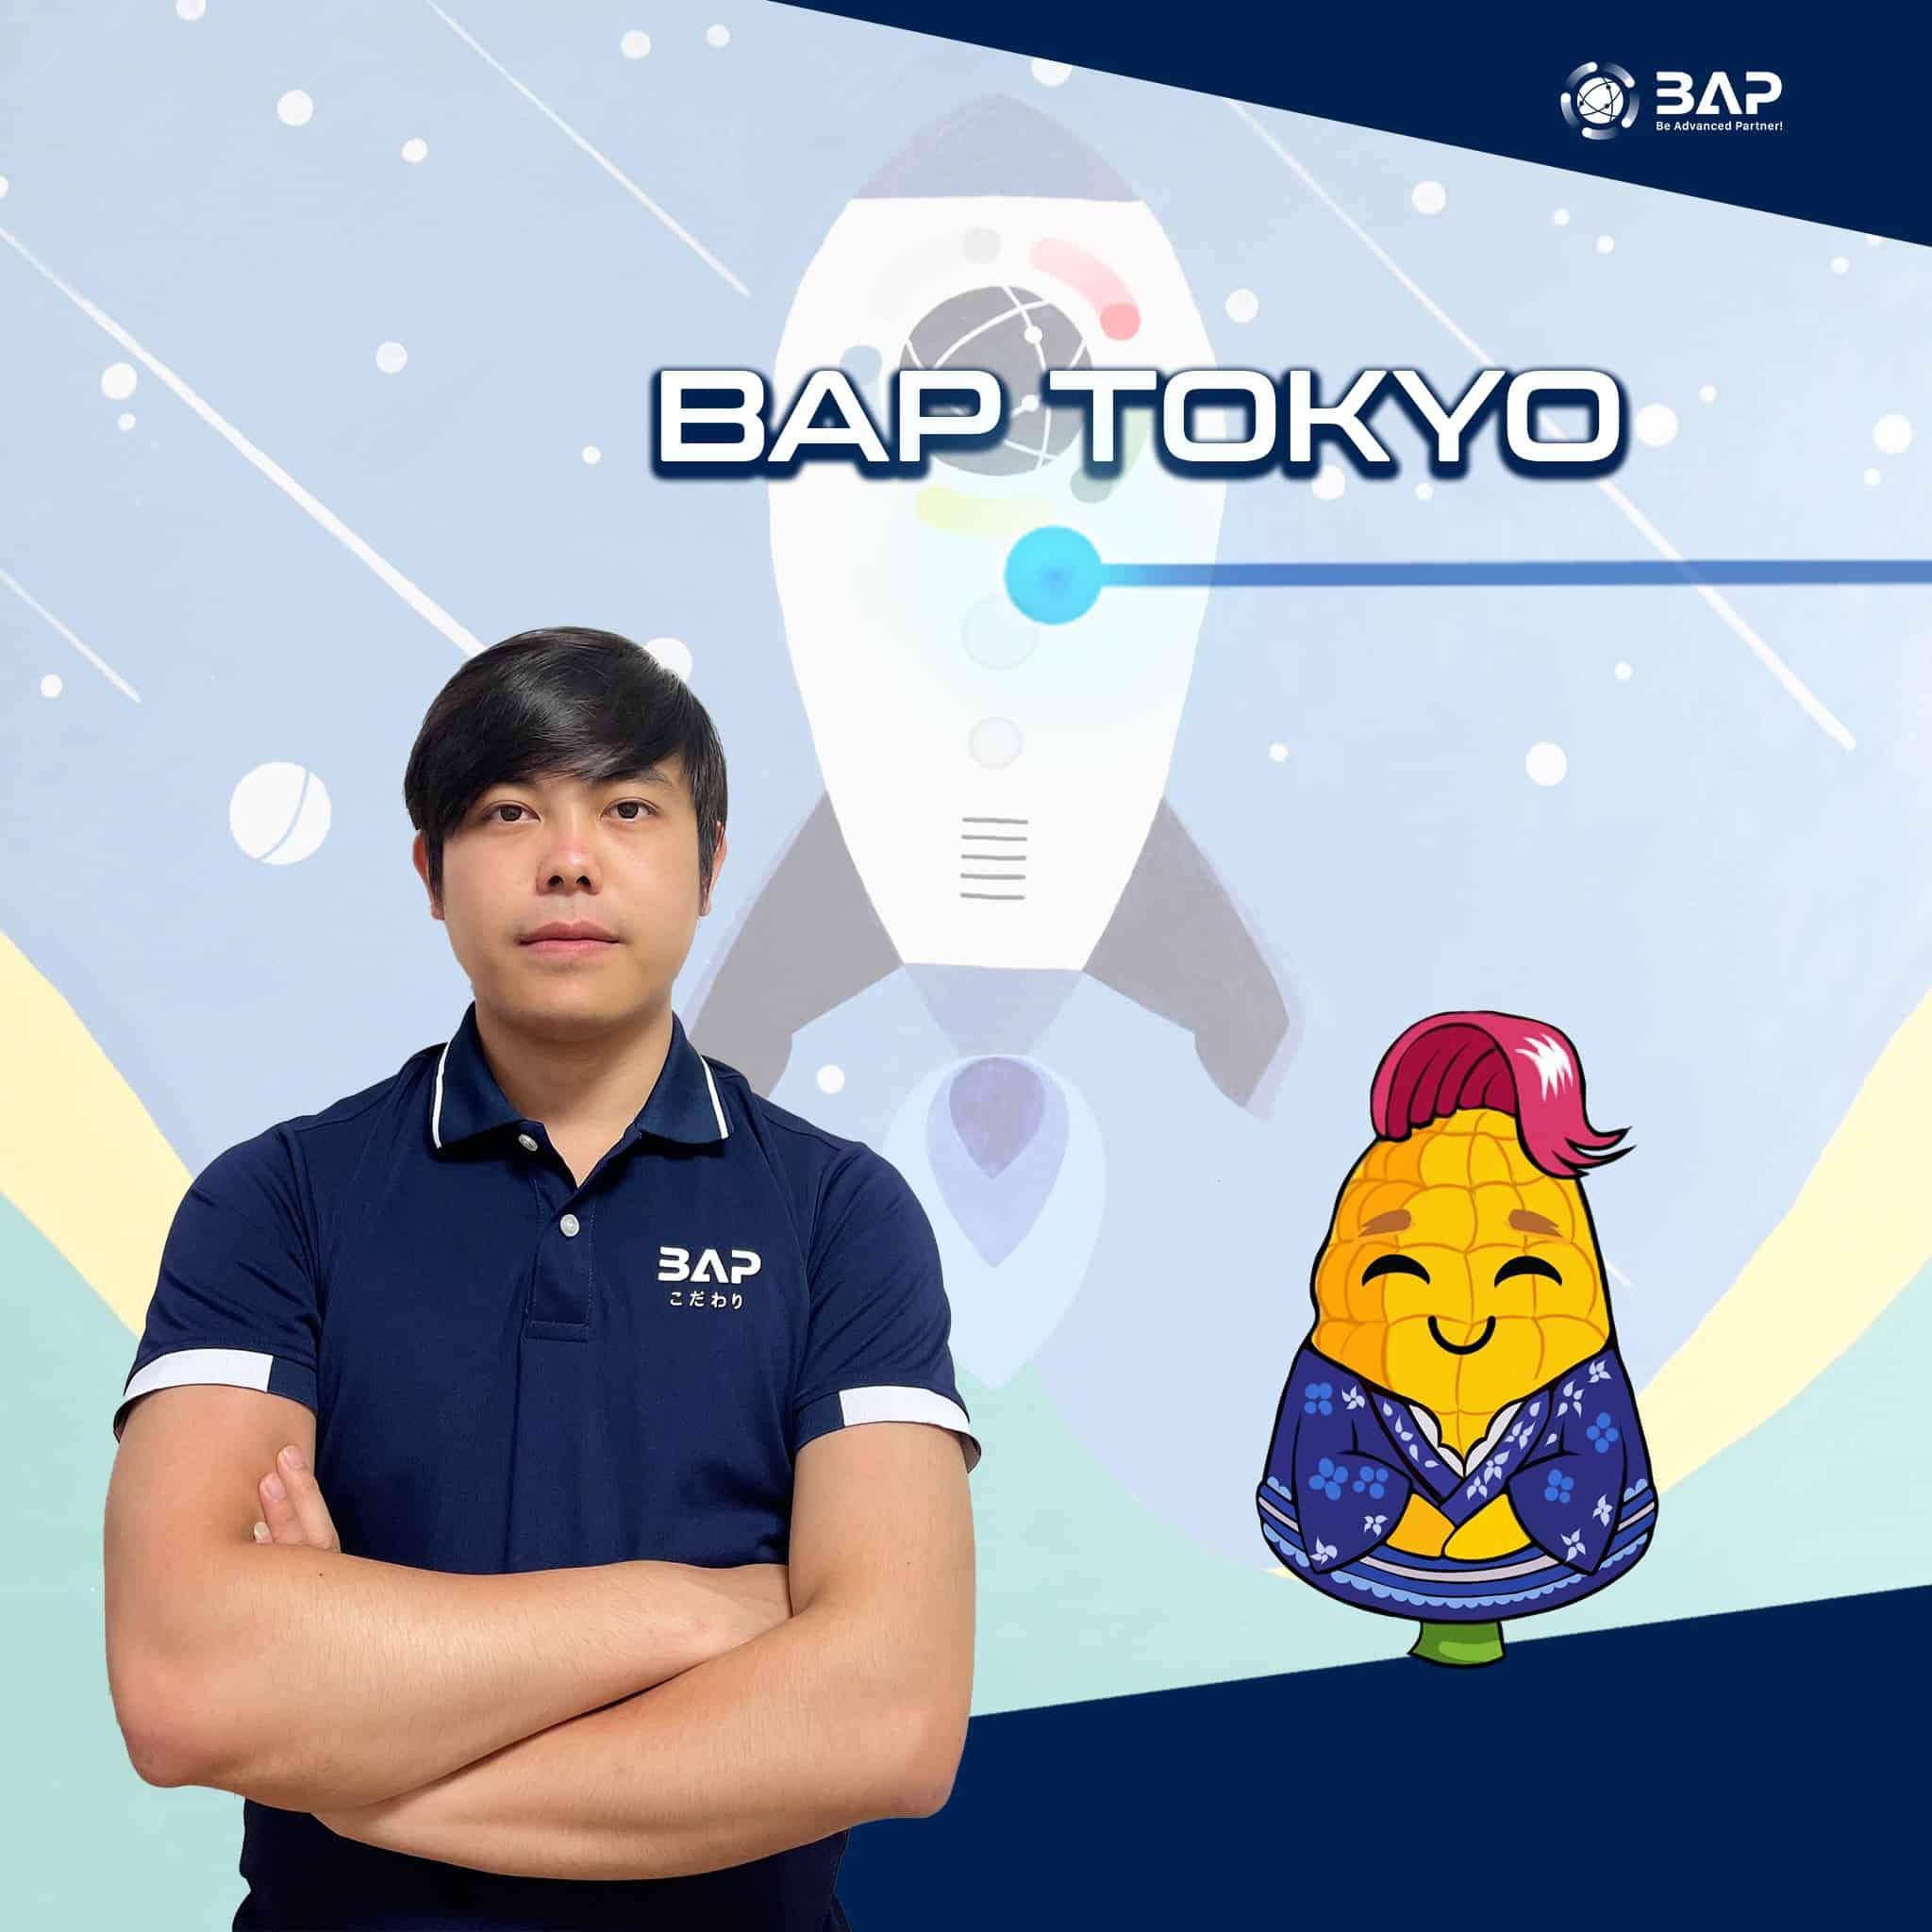 [BAP Office Tour] THE LAND OF CHERRY BLOSSOM – BAP TOKYO